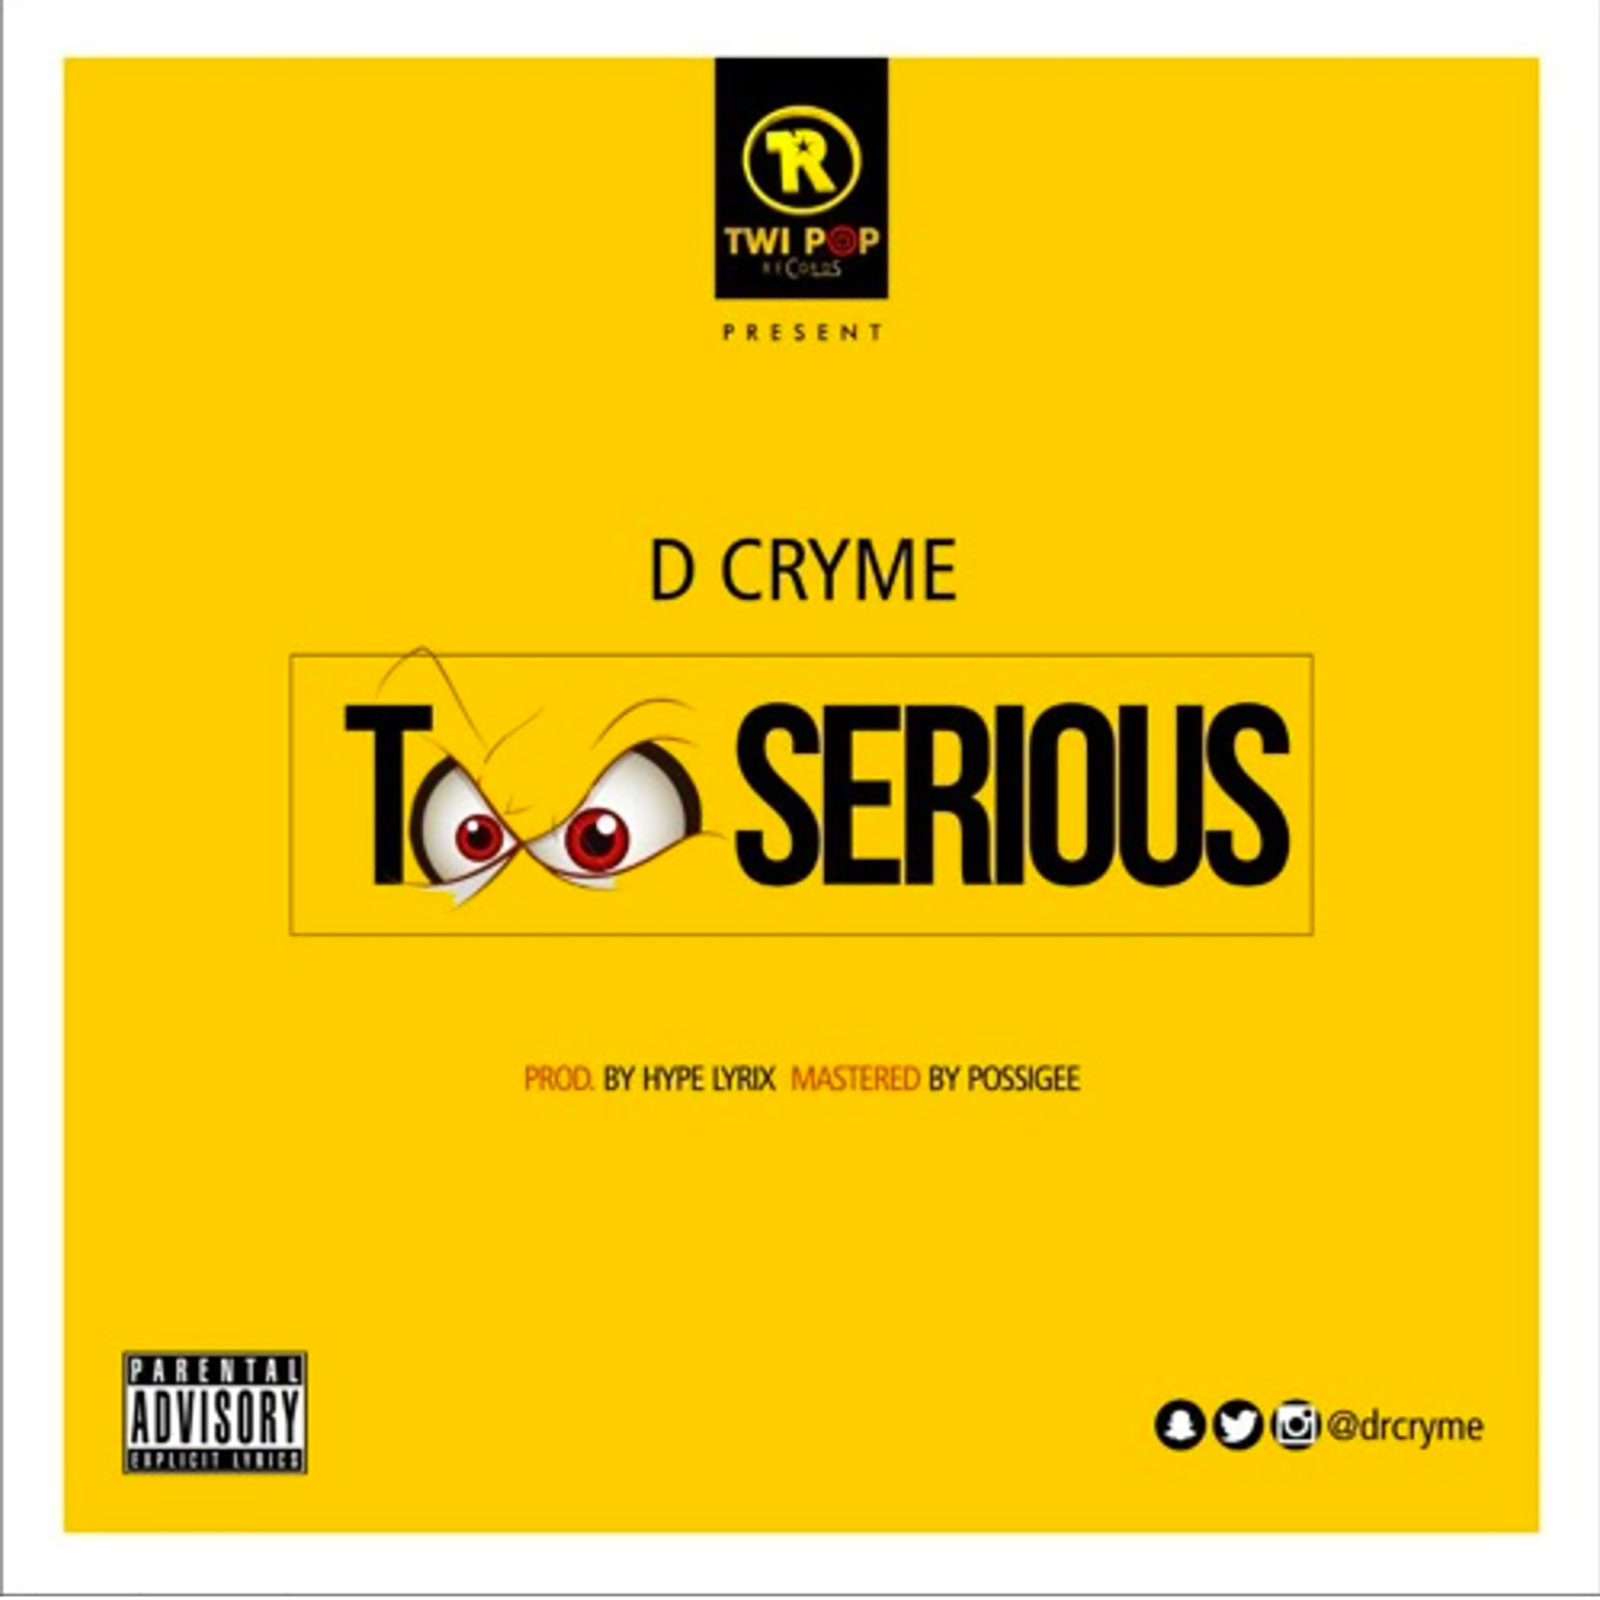 Too Serious by D Cryme